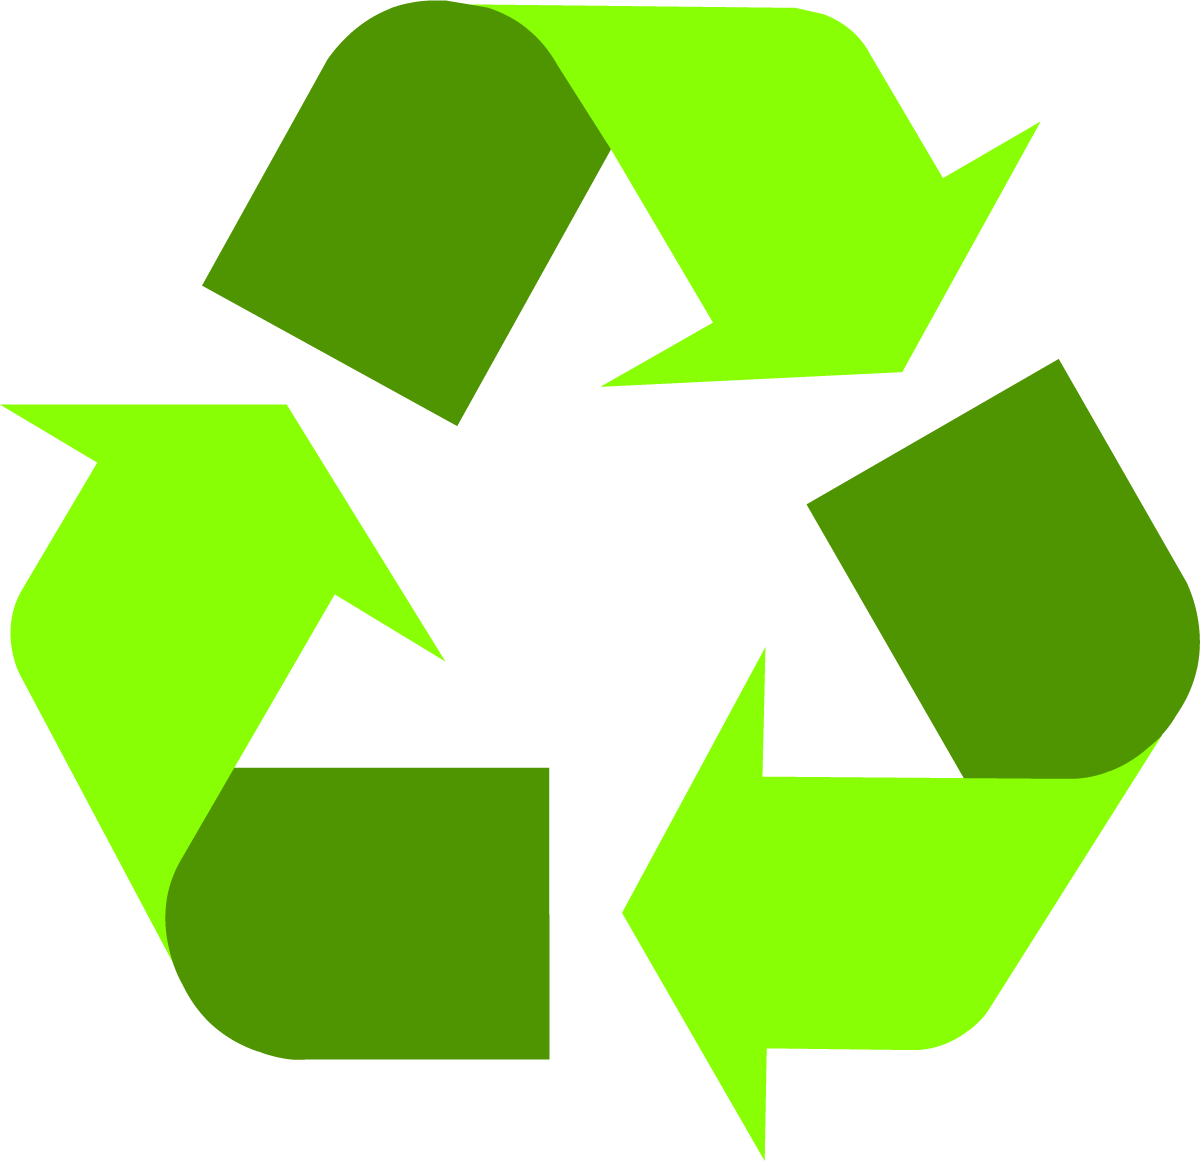 Recycle Logo - Recycling Symbol the Original Recycle Logo